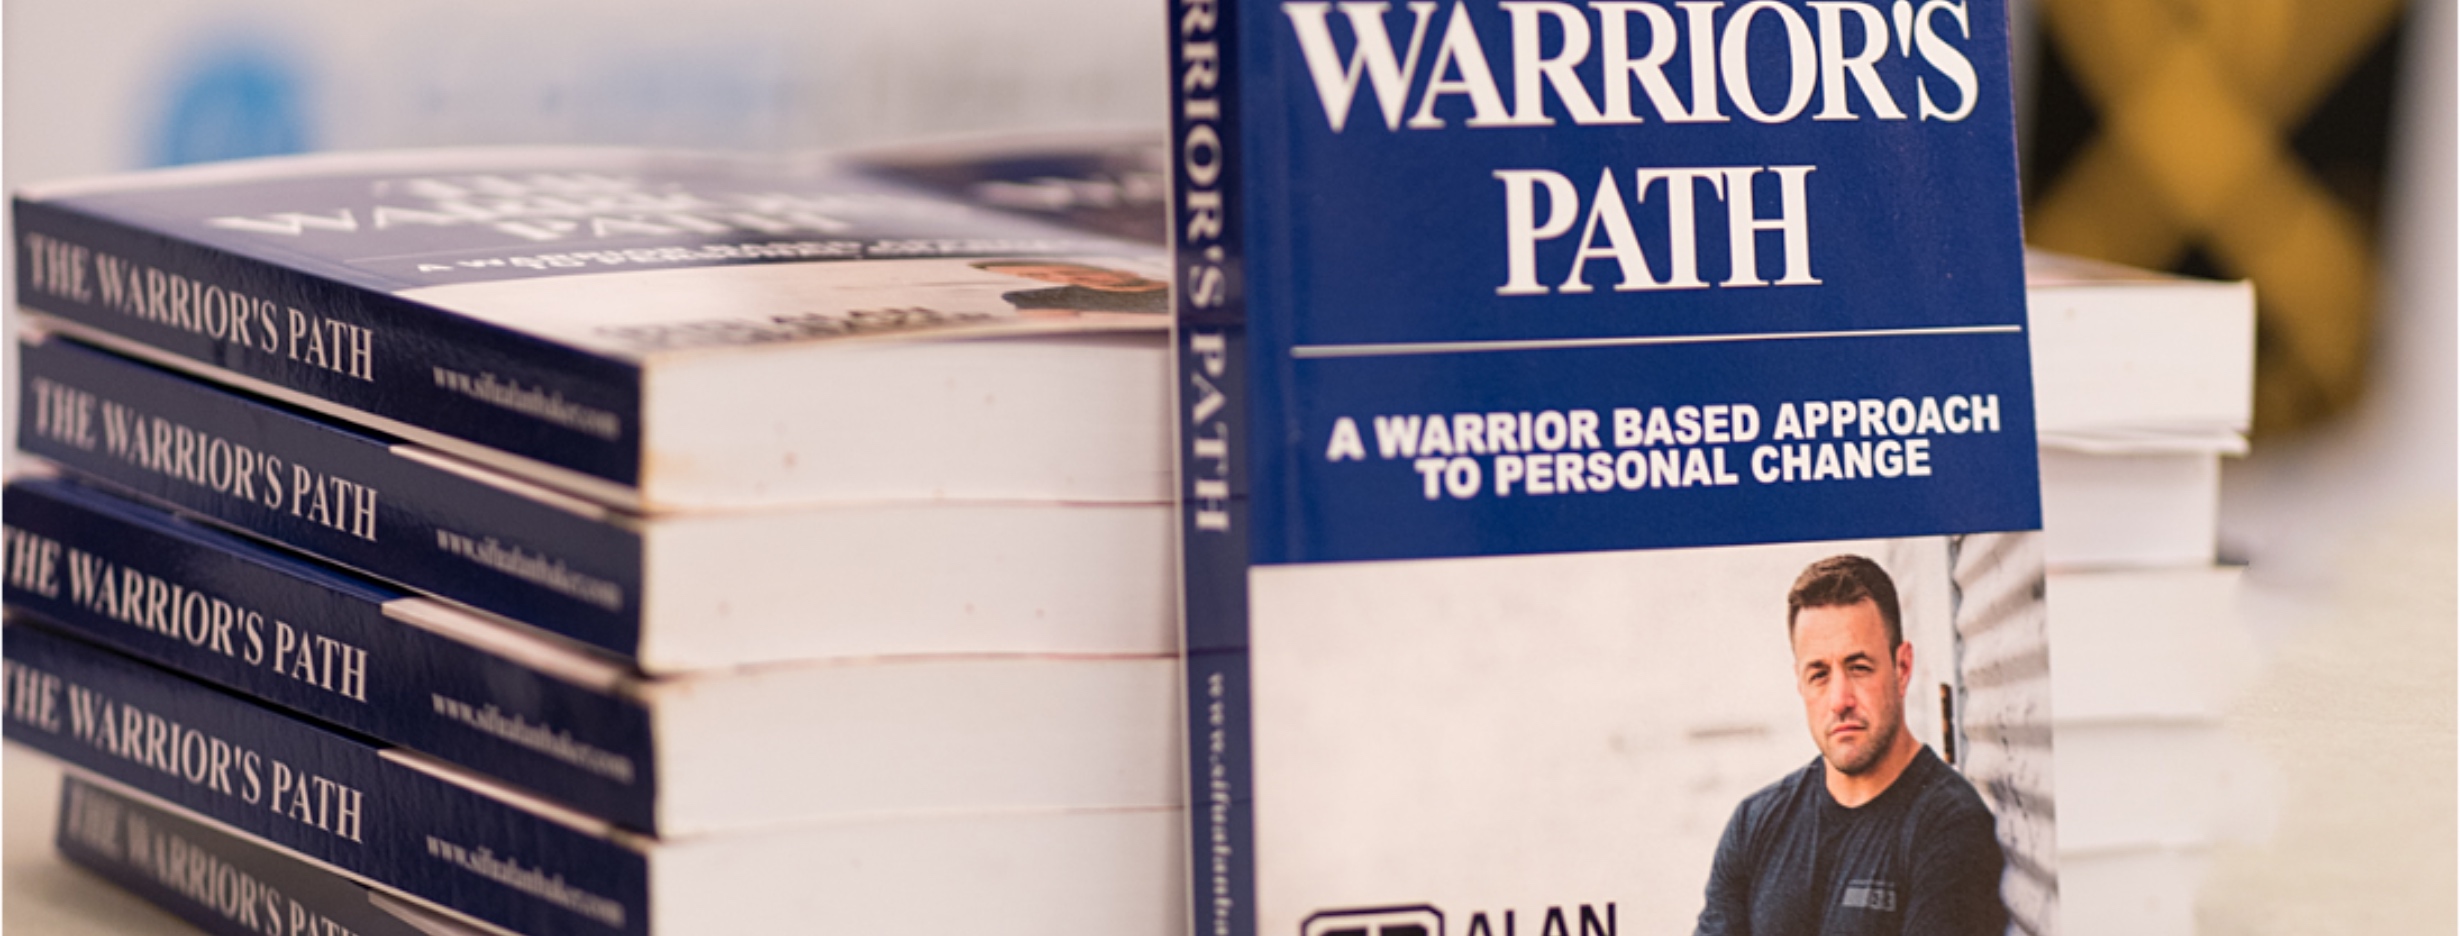 a photo of the book "Warriors Path" 